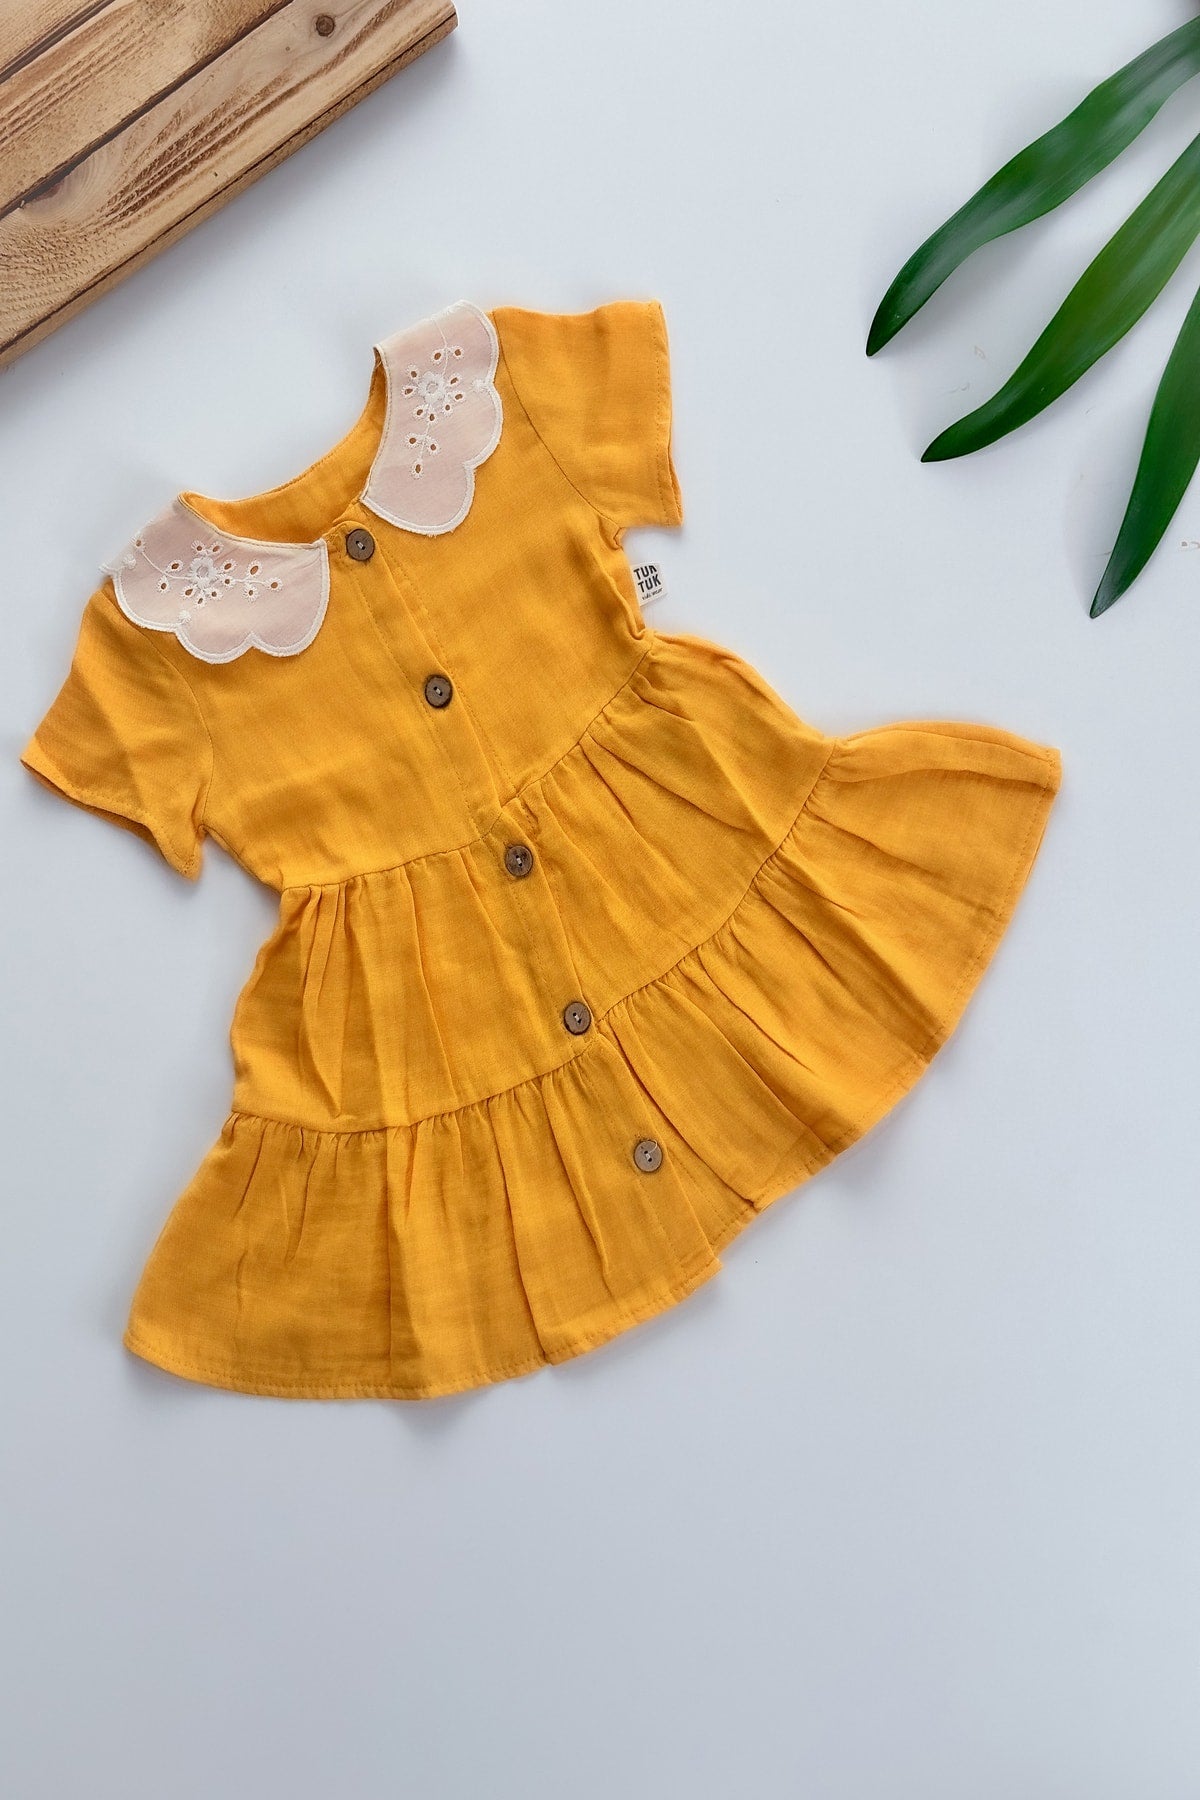 Baby Girl Girl Summer Dress Short Sleeve Lace Collar Baby Suit Baby Clothing